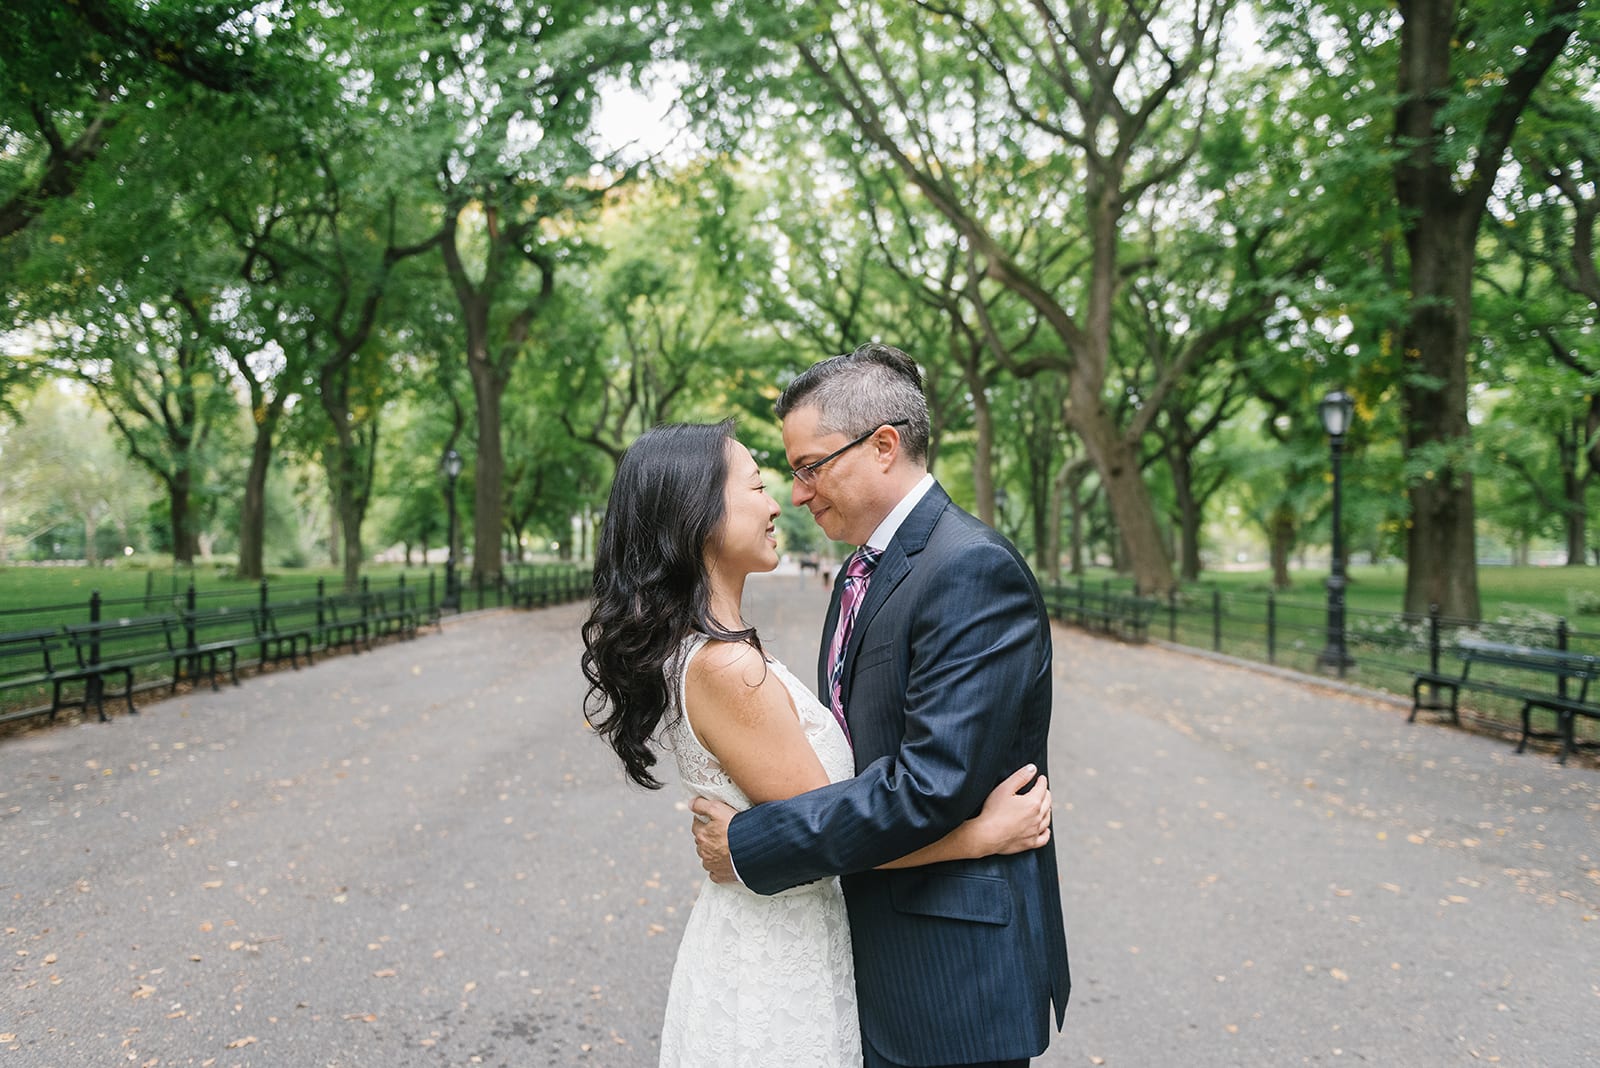 The Mall wedding in Central Park, New York